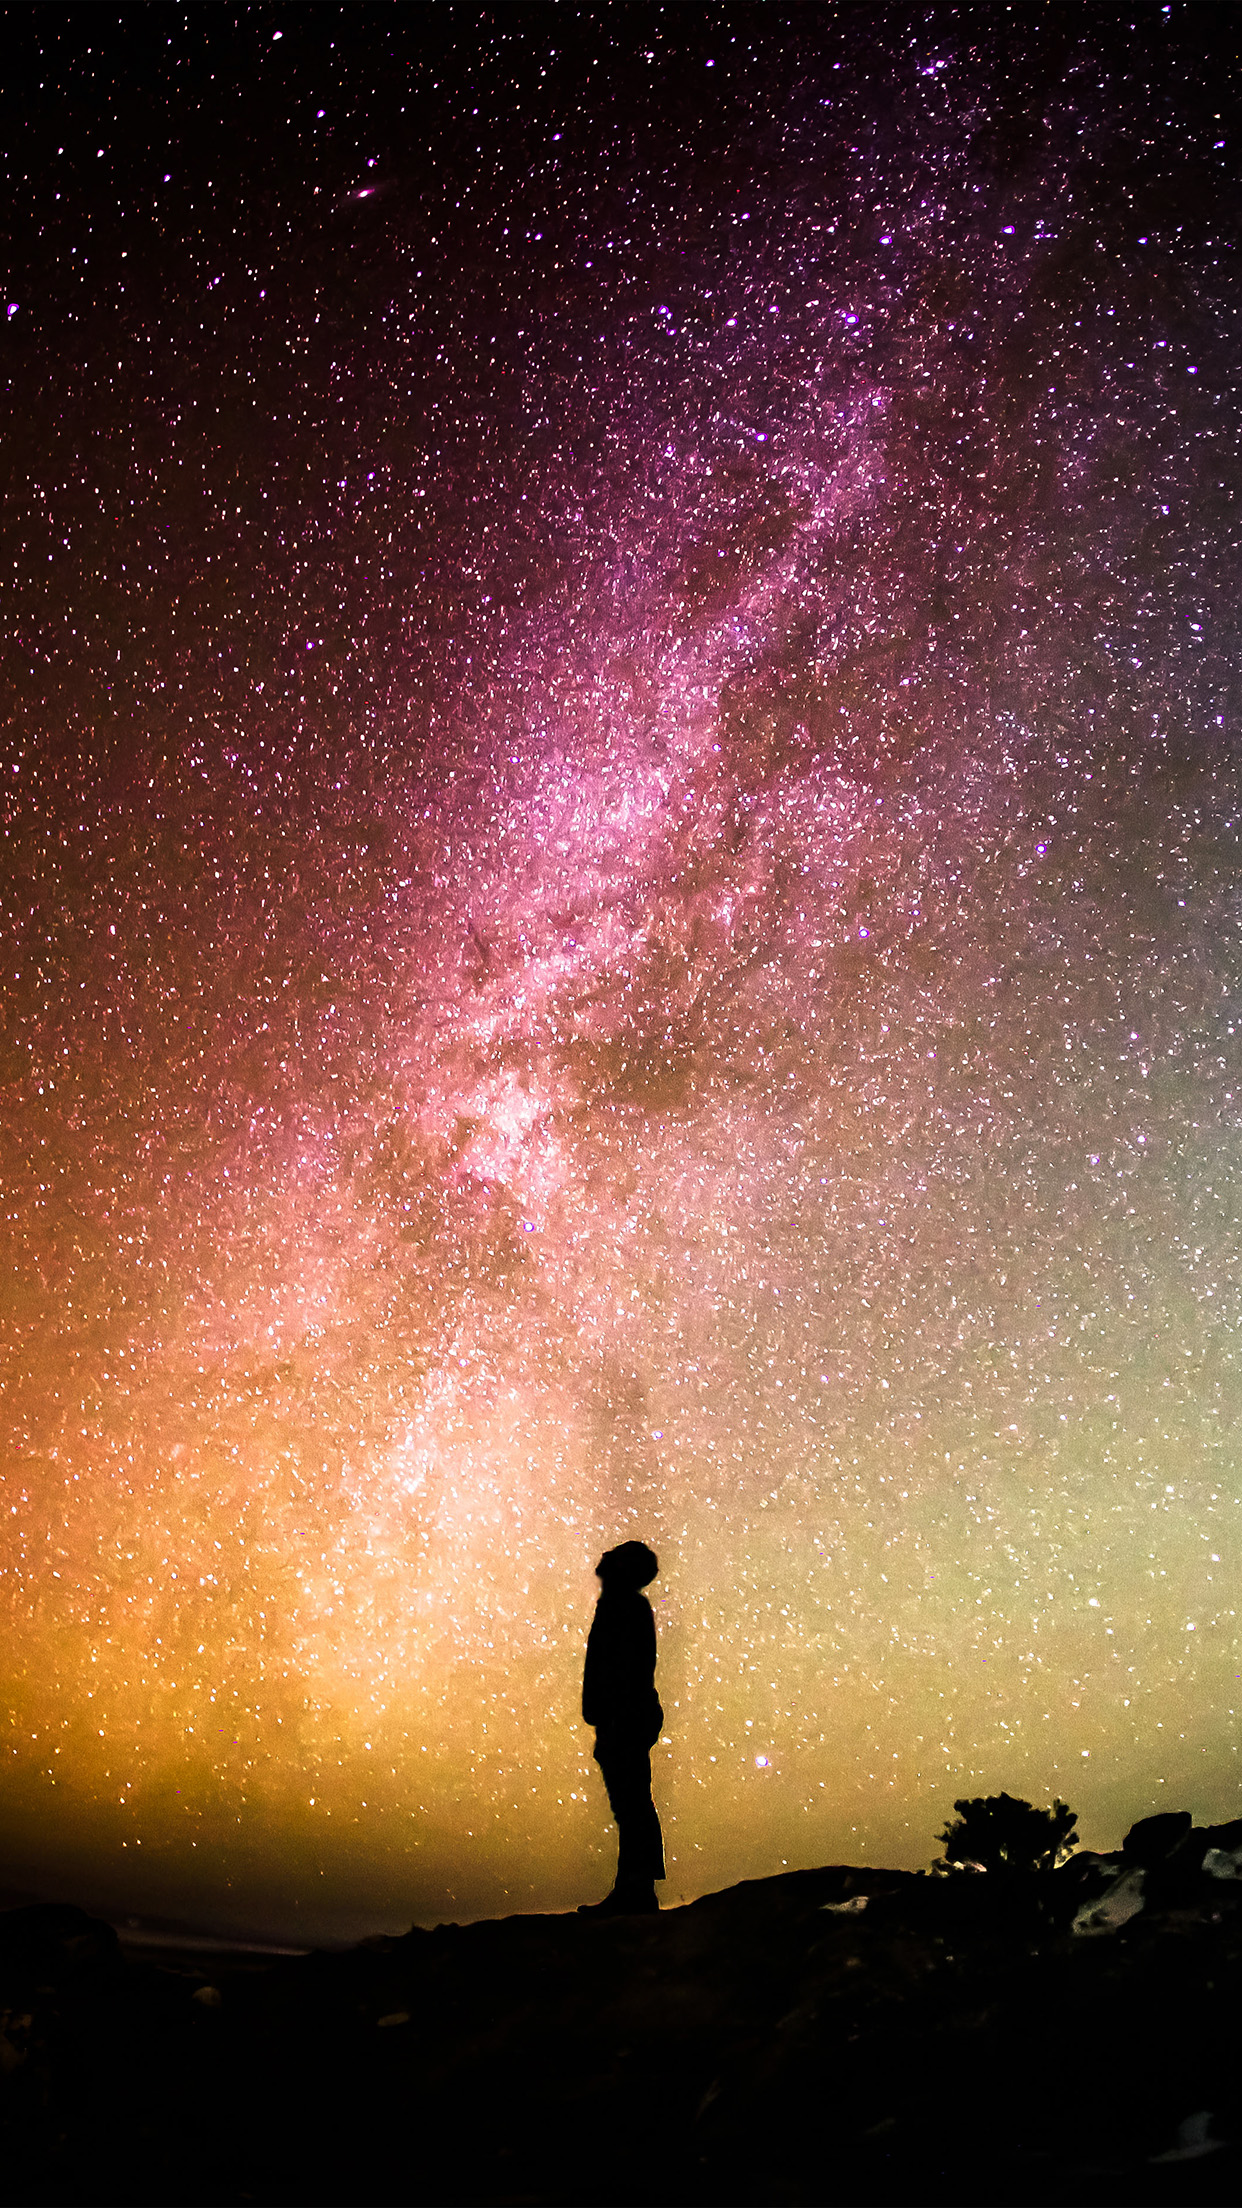 Sky Galaxy Milkyway Space Night Android wallpaper